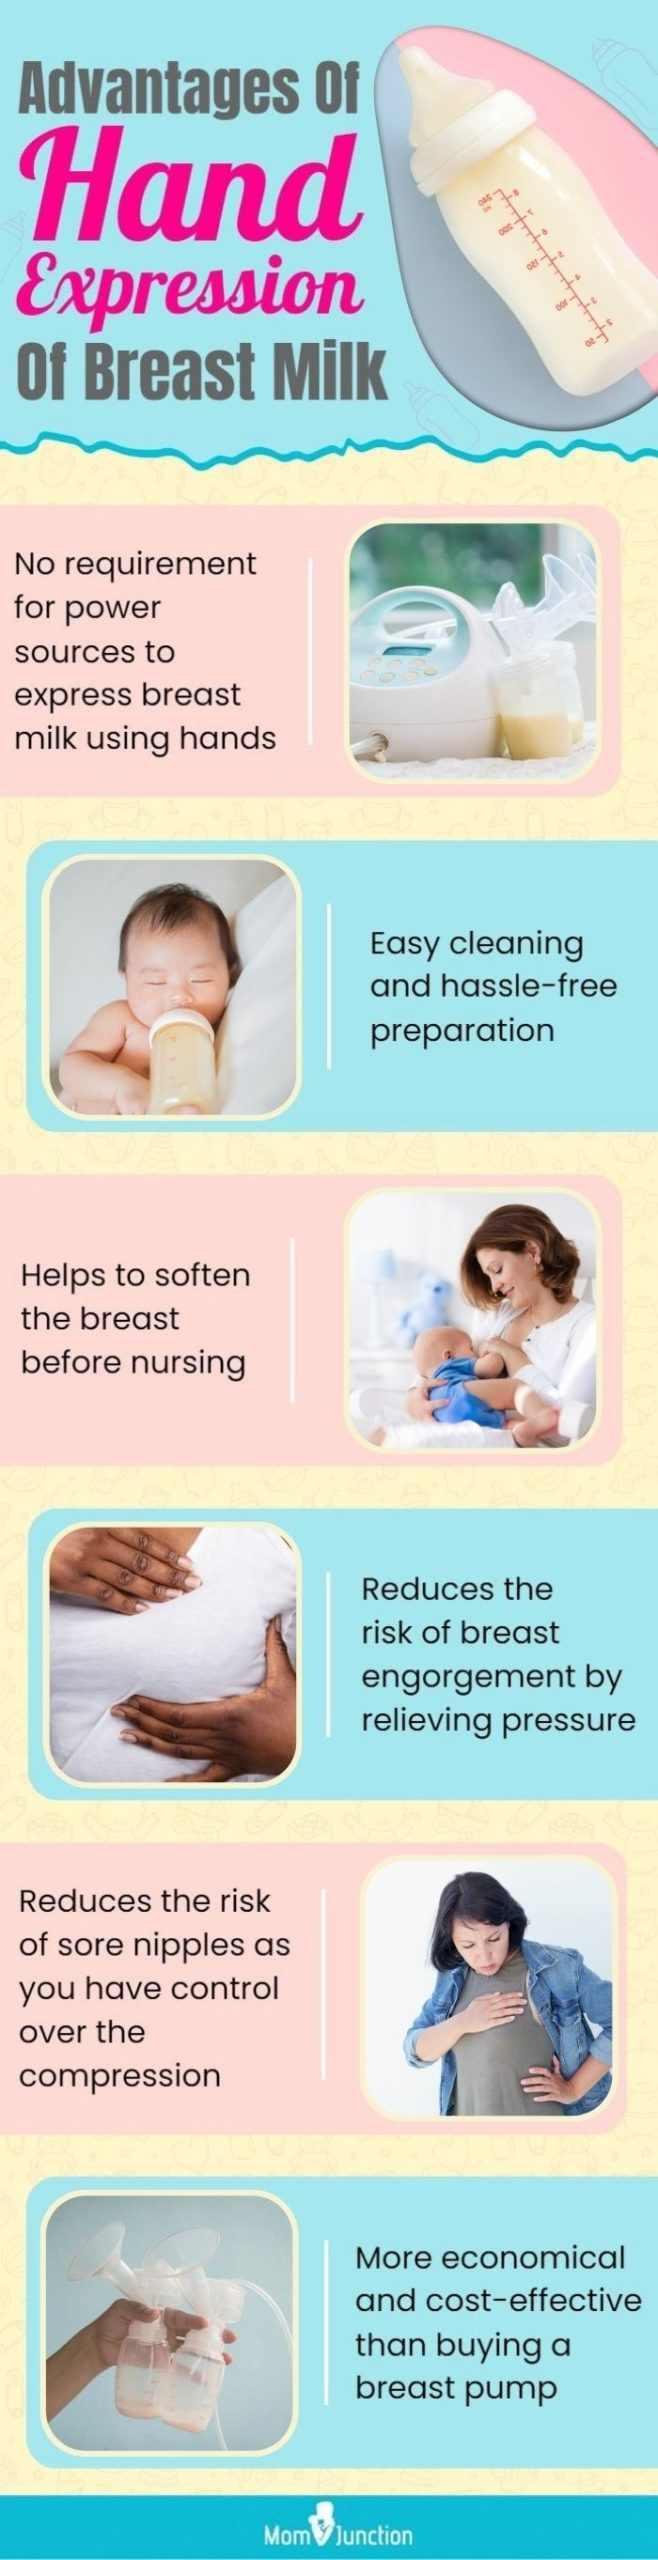 advantages of hand expression of breast milk (infographic)